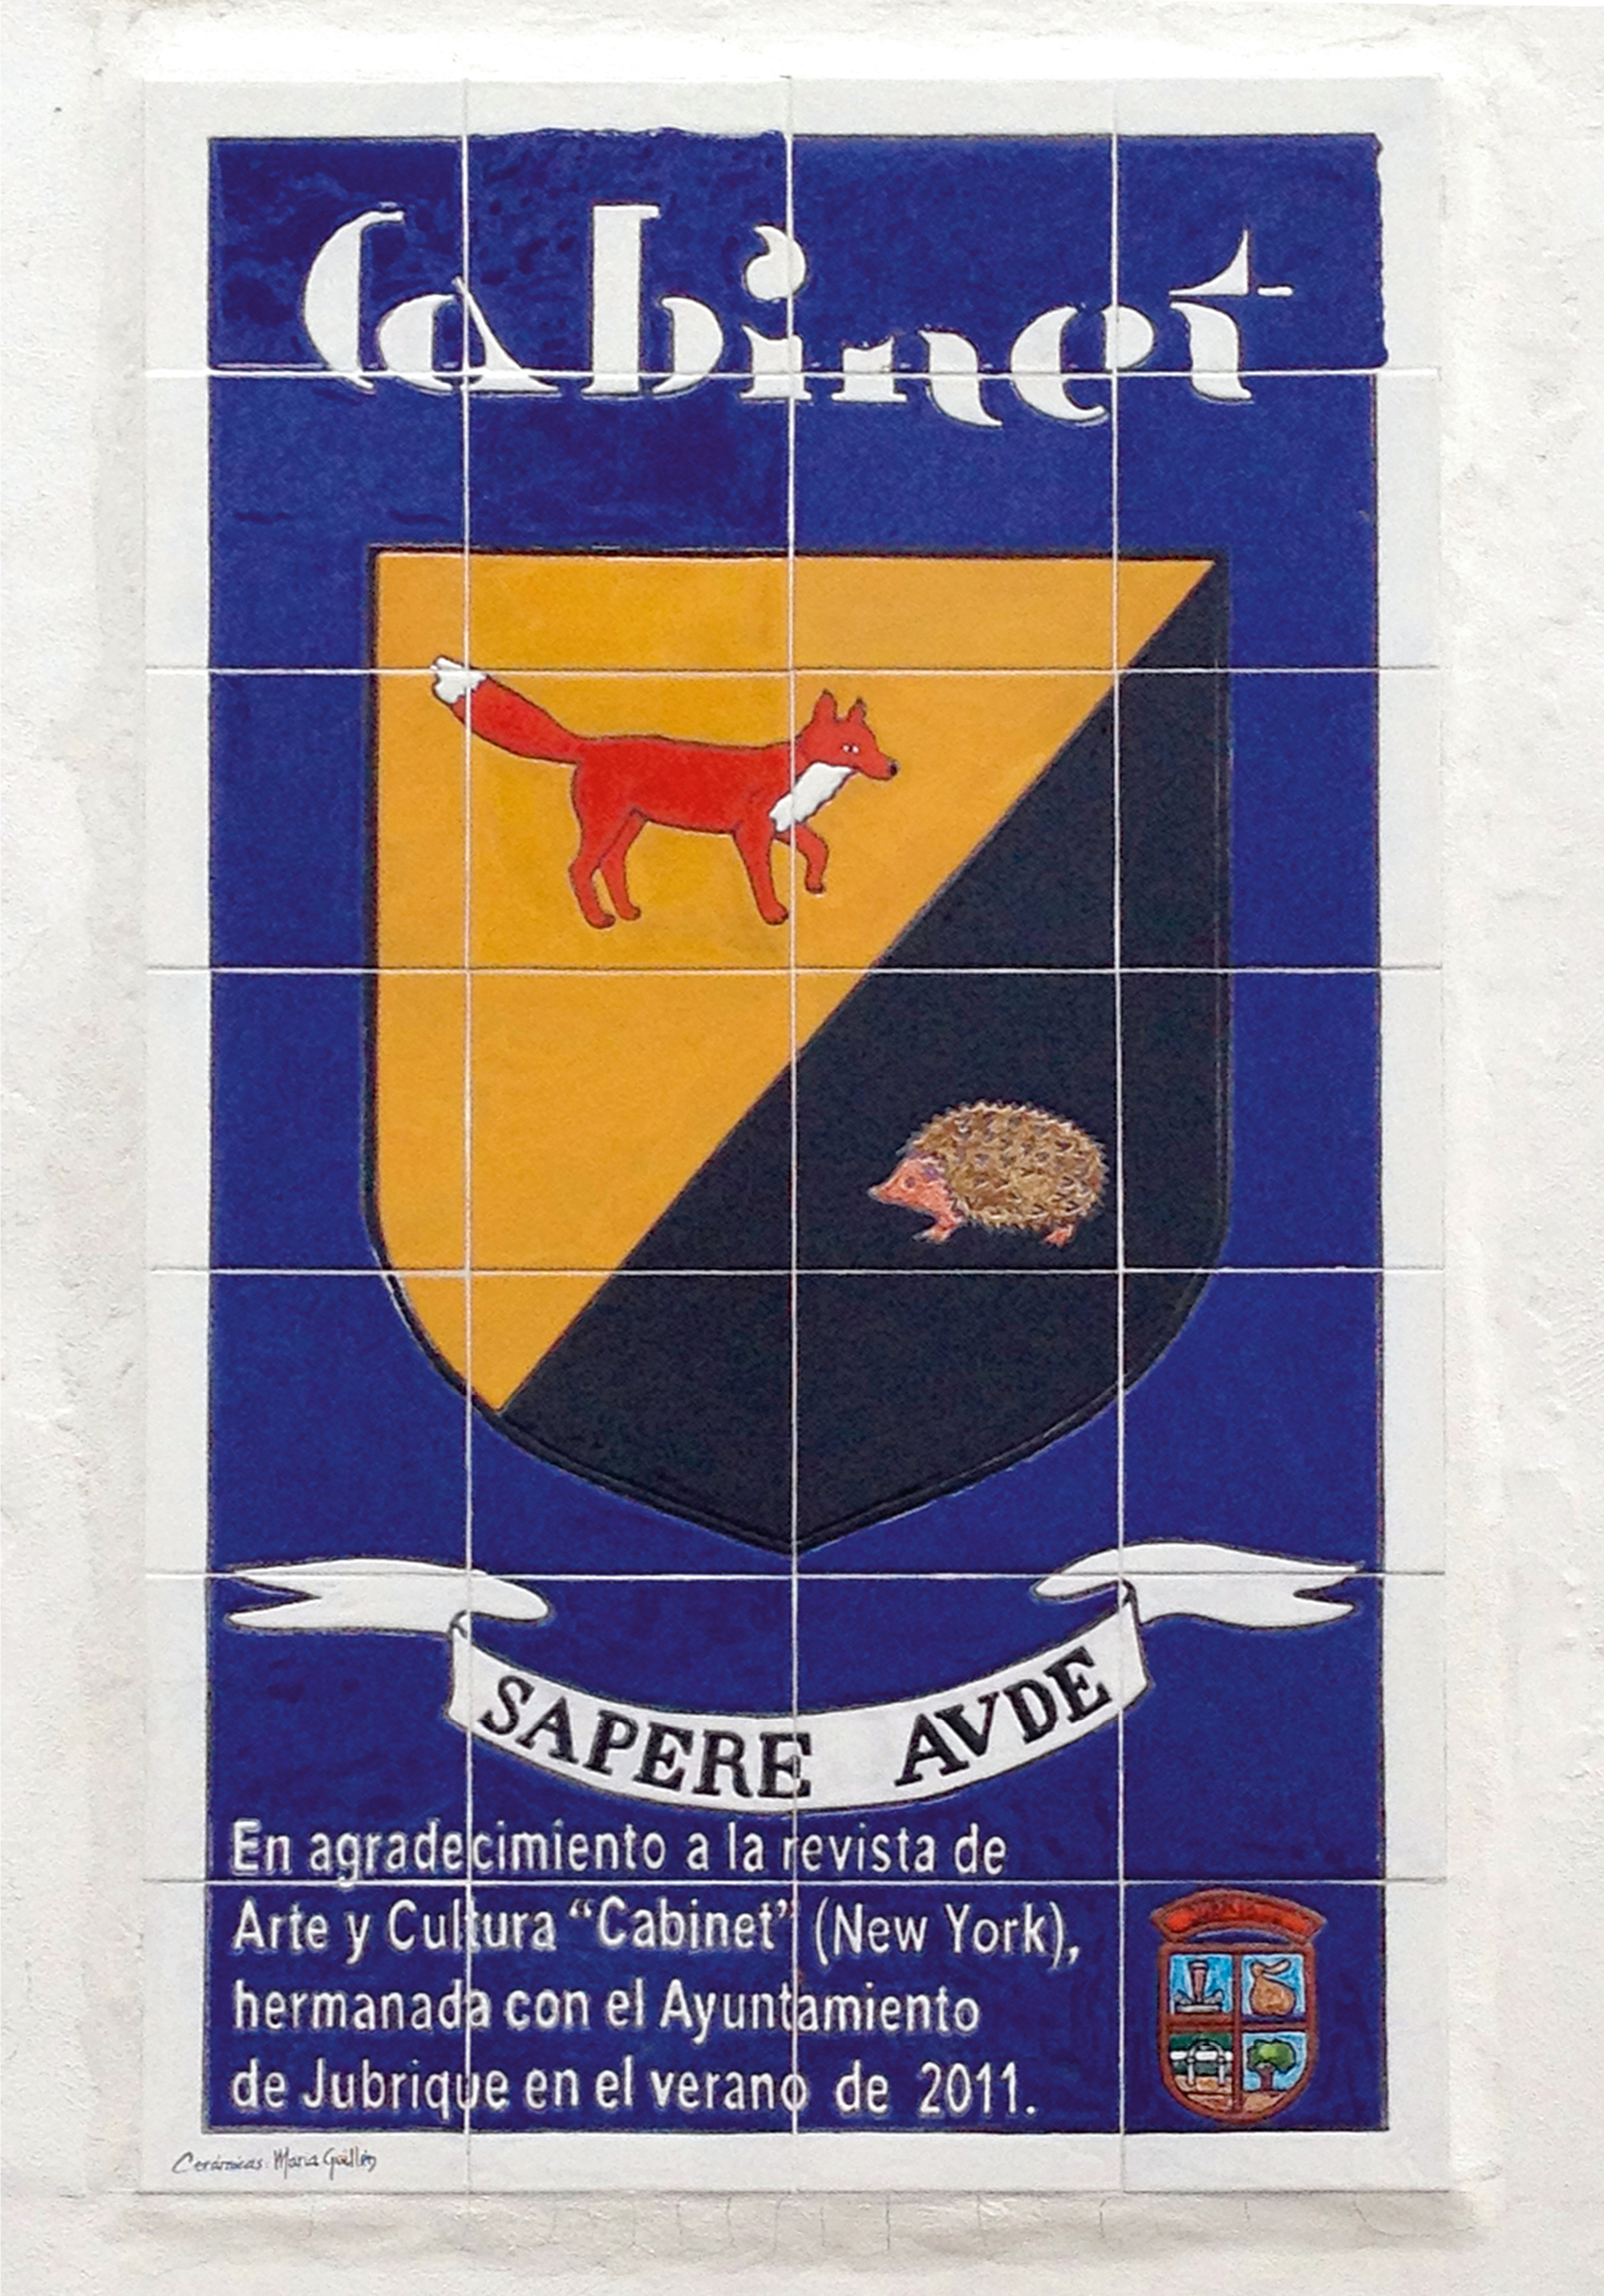 Cabinet’s arriviste coat of arms finds itself next to Jubrique’s venerable shield. The Spanish text roughly translates as: “In gratitude to the art and culture magazine ‘Cabinet’ (New York), twinned with the municipality of Jubrique in the summer of 2011.”